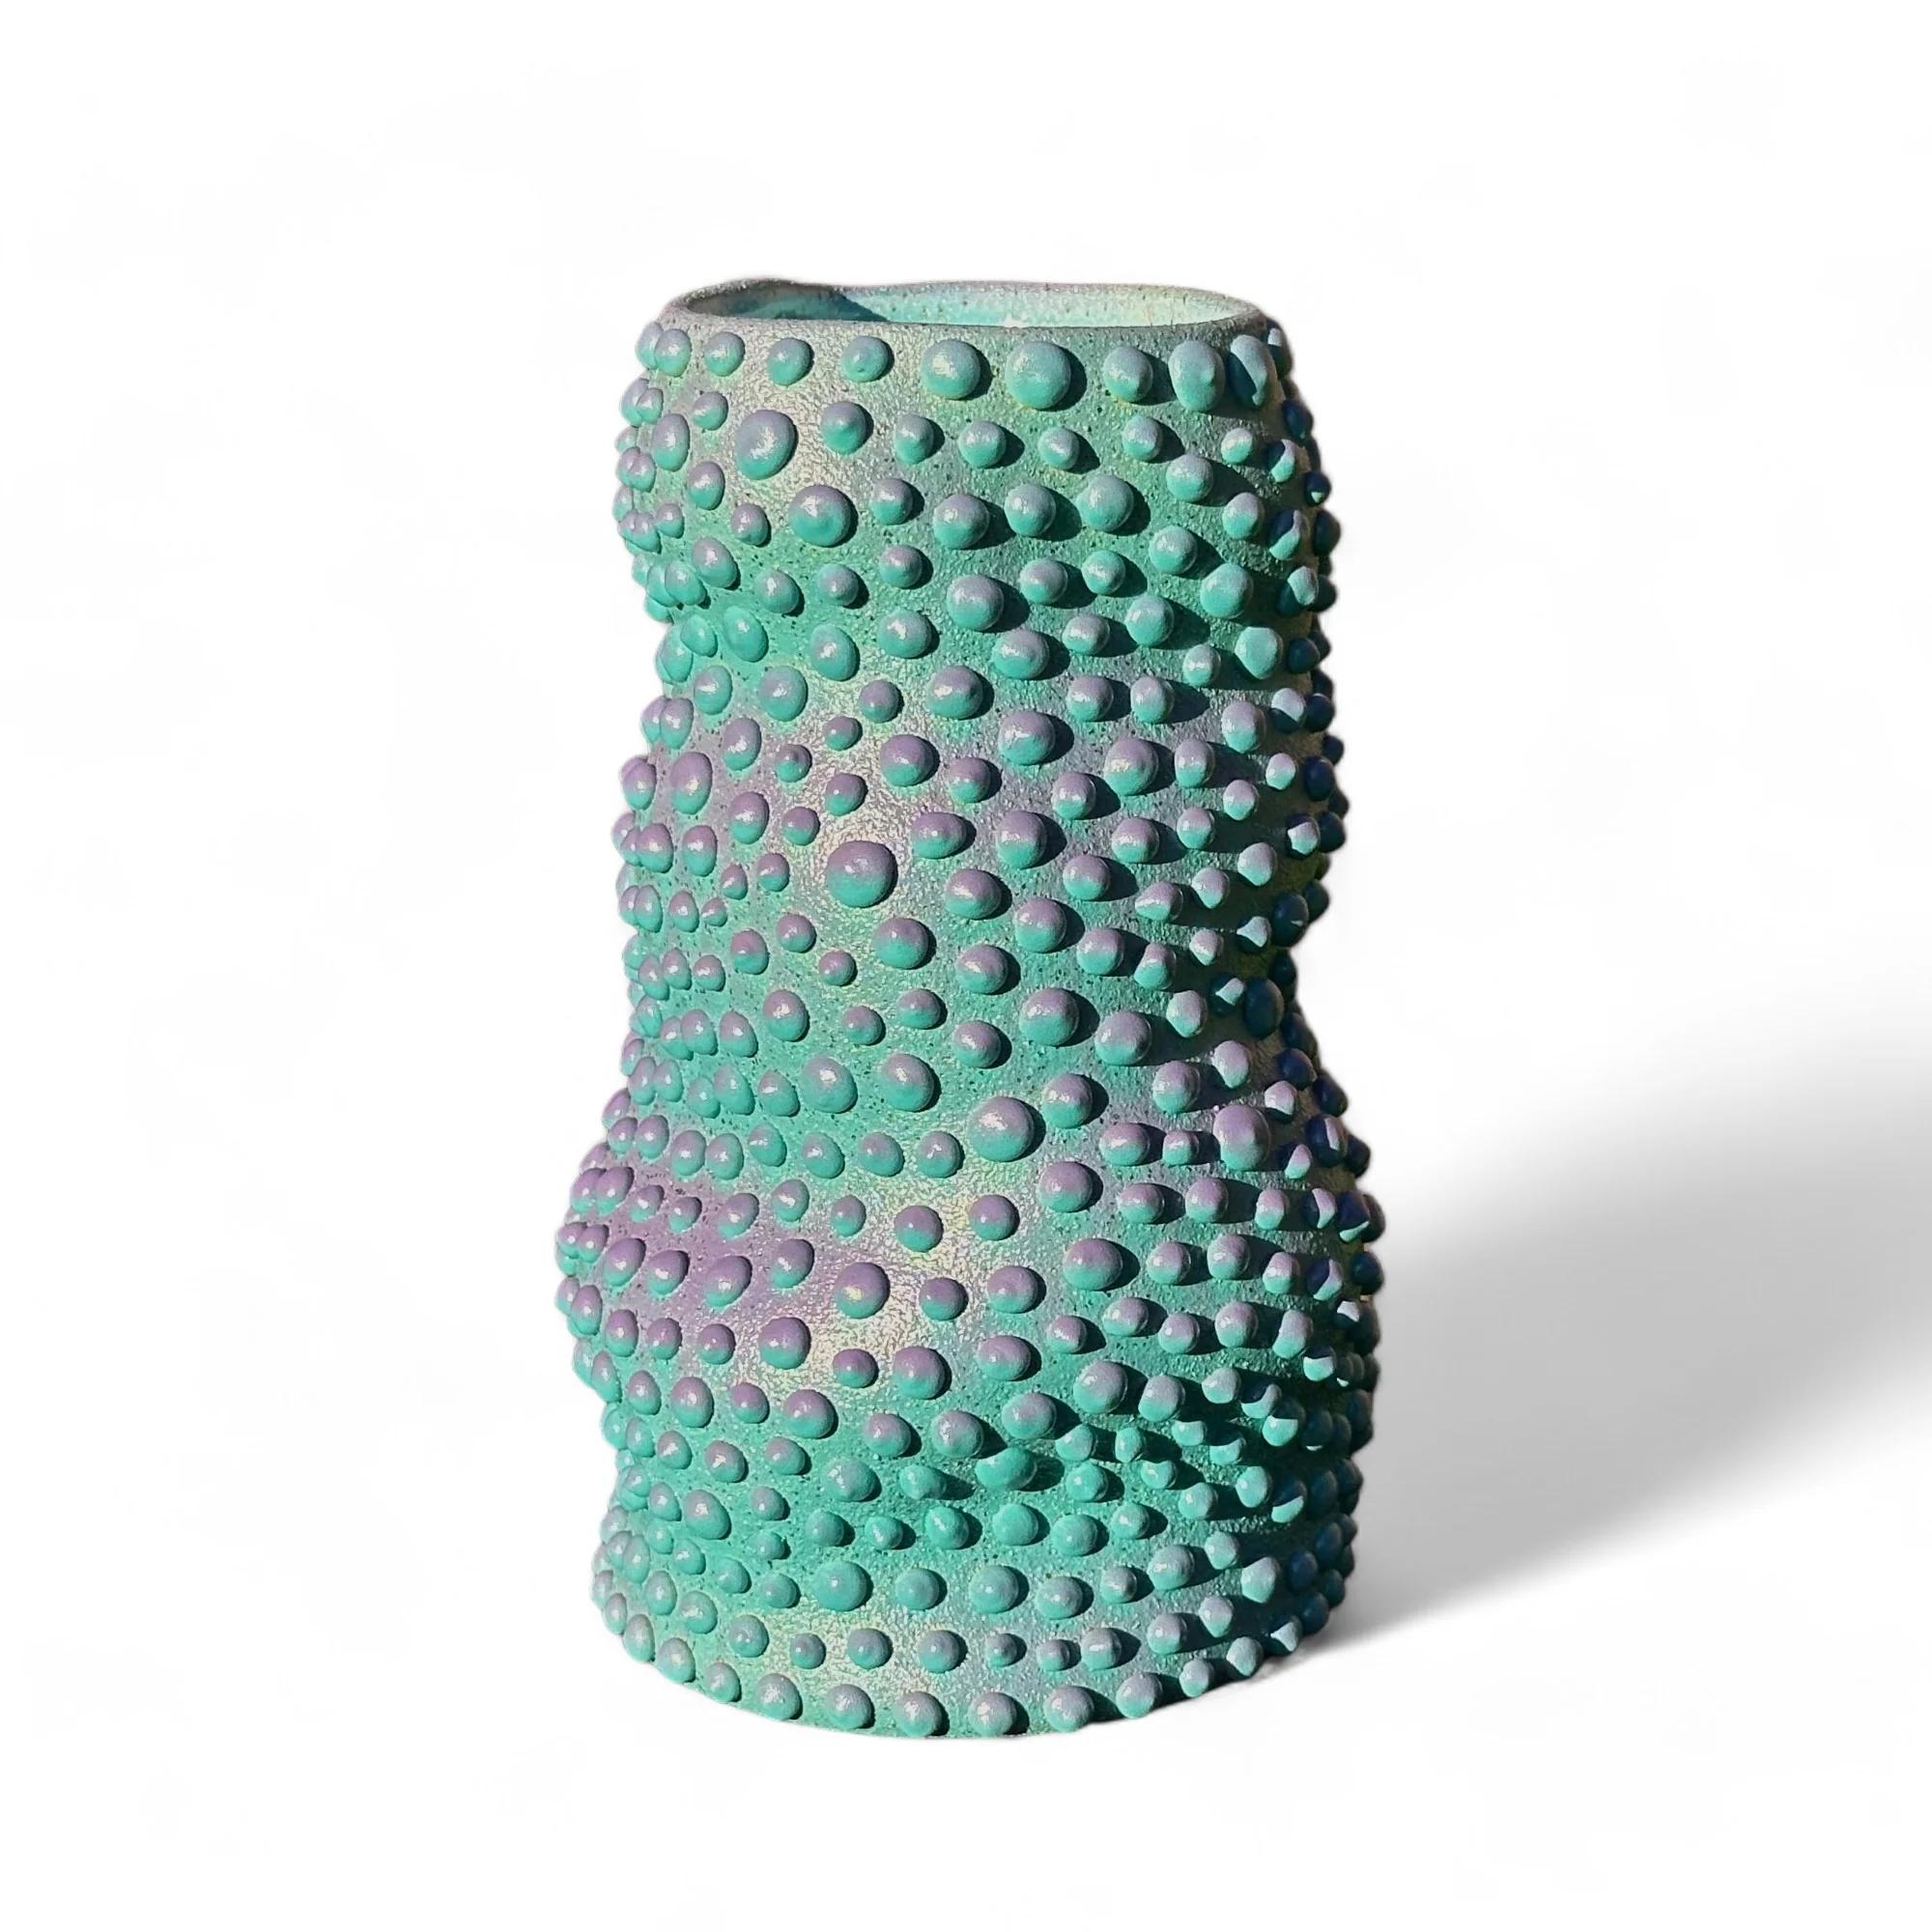 Teal And Purple Wavy Organic Dot Ombre Vase In Excellent Condition For Sale In Berkeley, CA